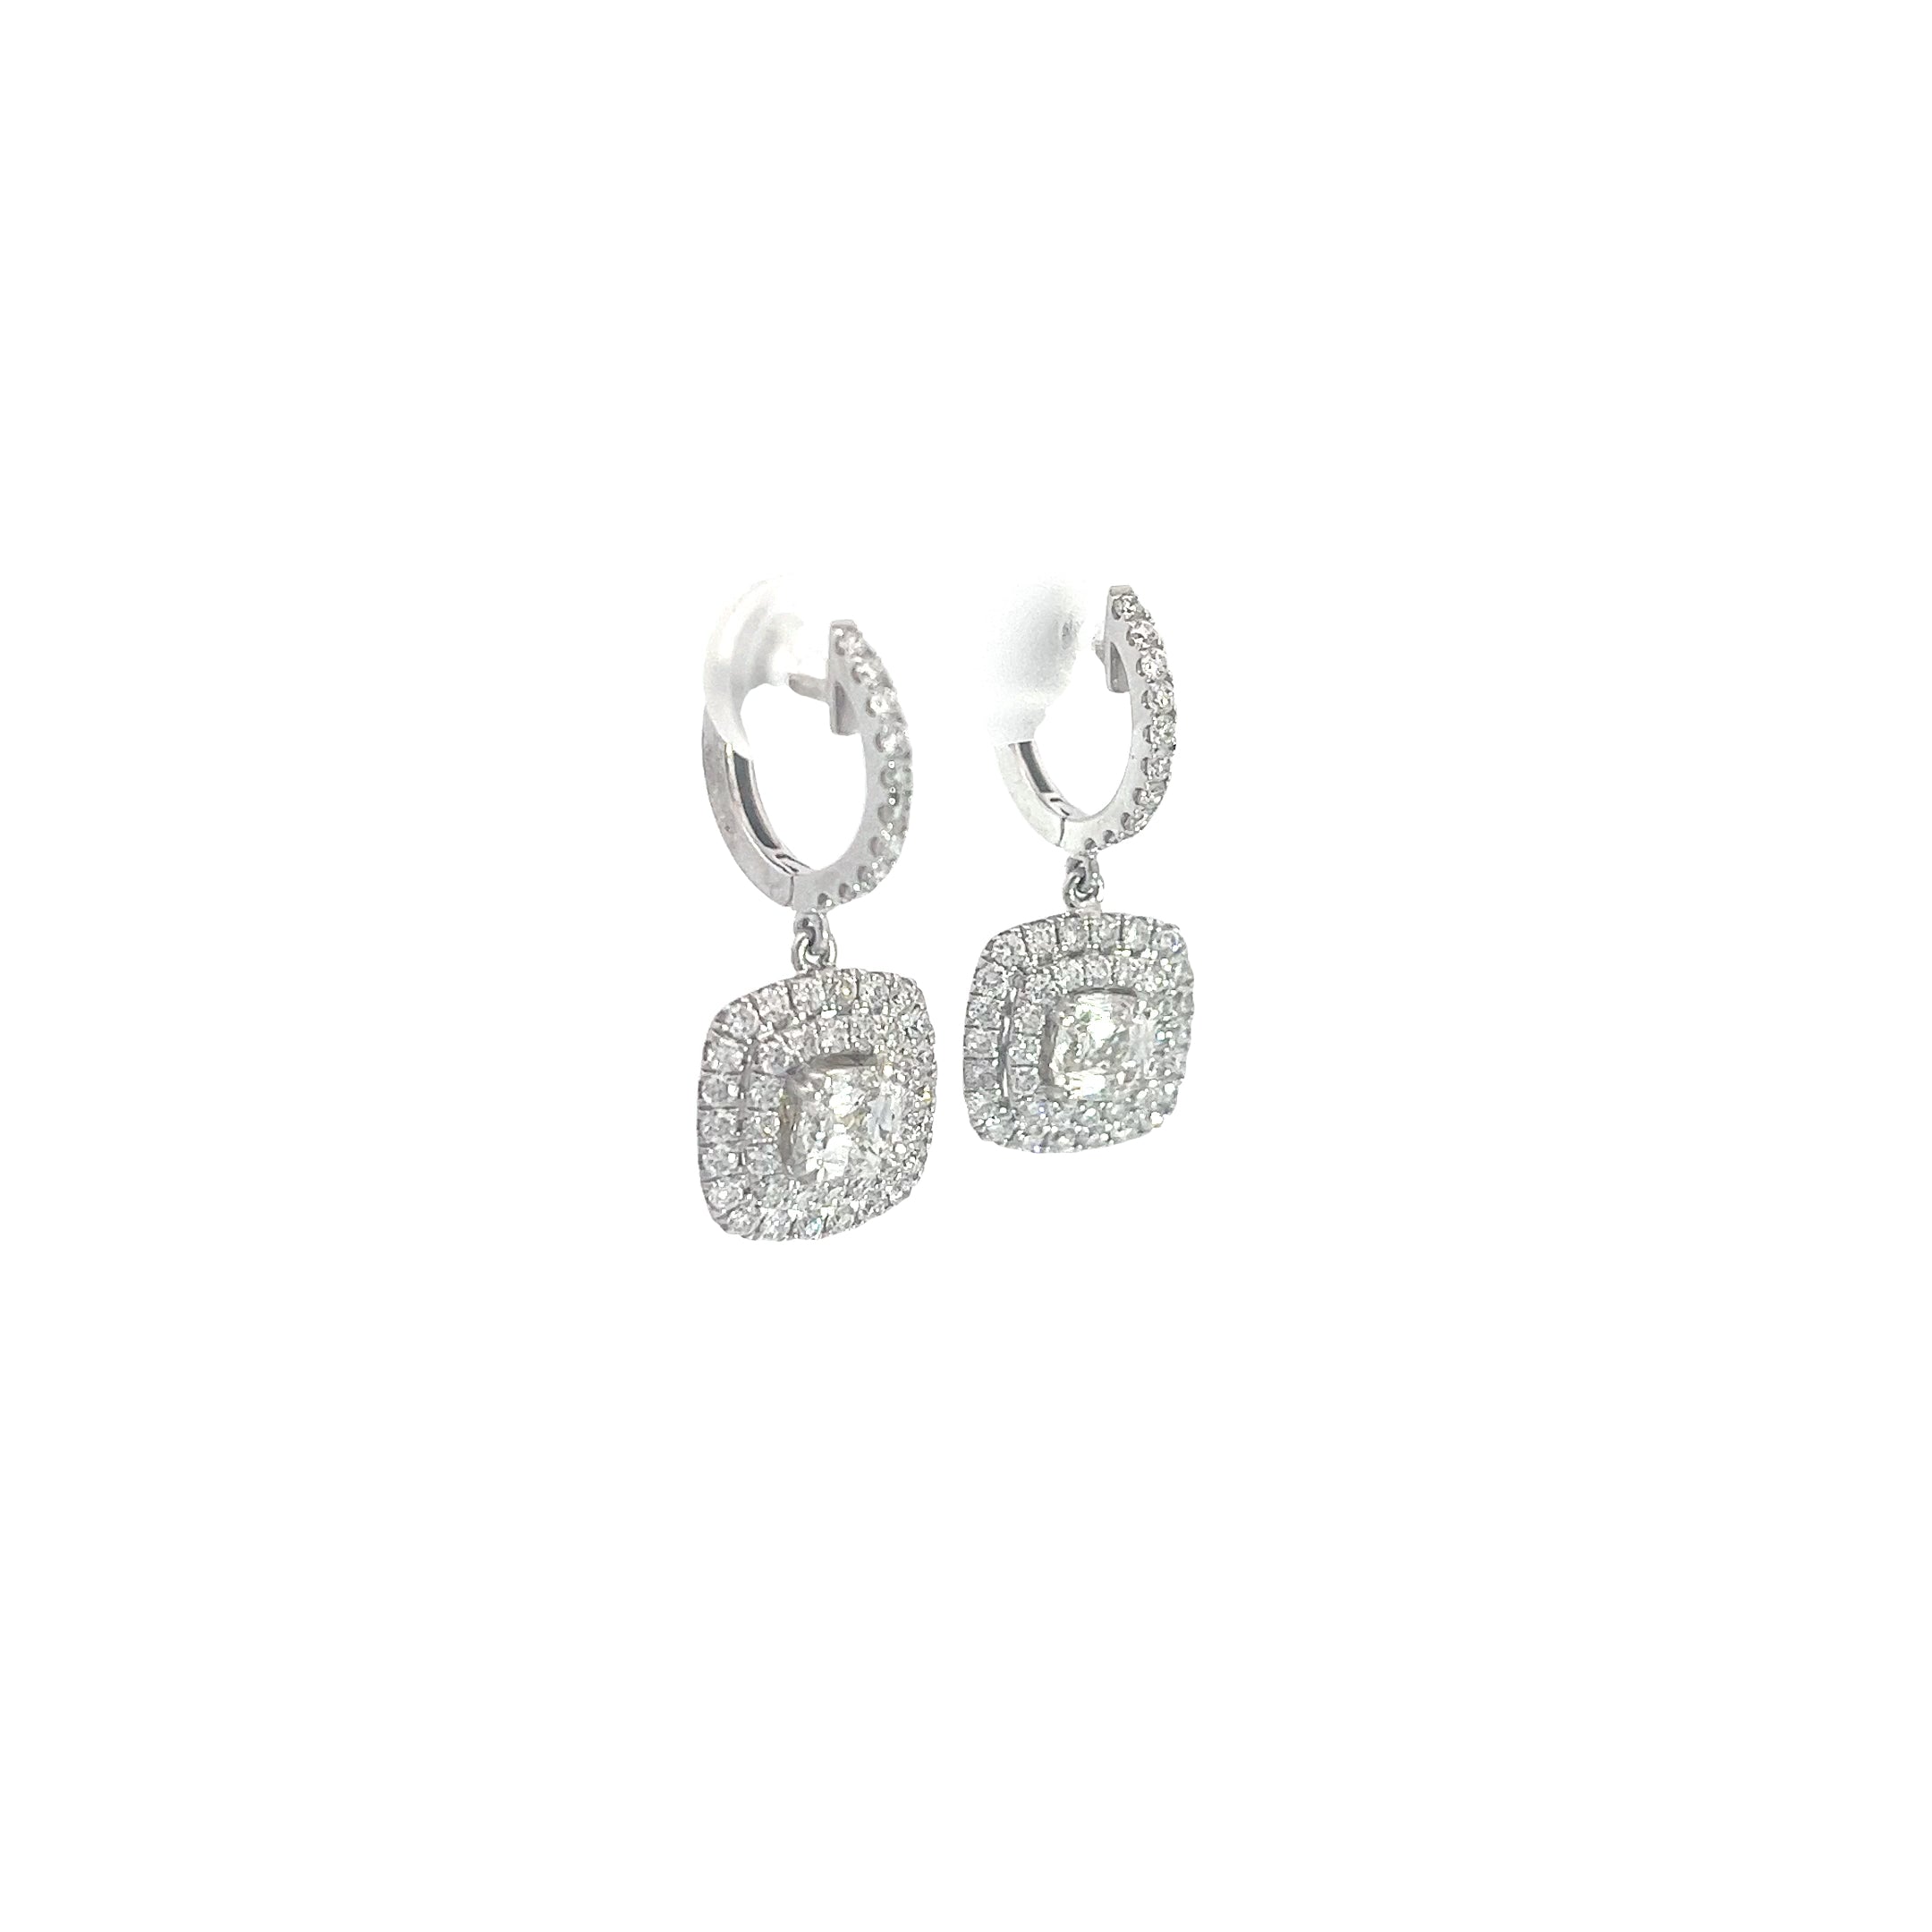 18K WHITE GOLD 1.43CT CUSHION CUT AND 1.50CT ROUND G VS2 PAVE SET DROP EARRINGS